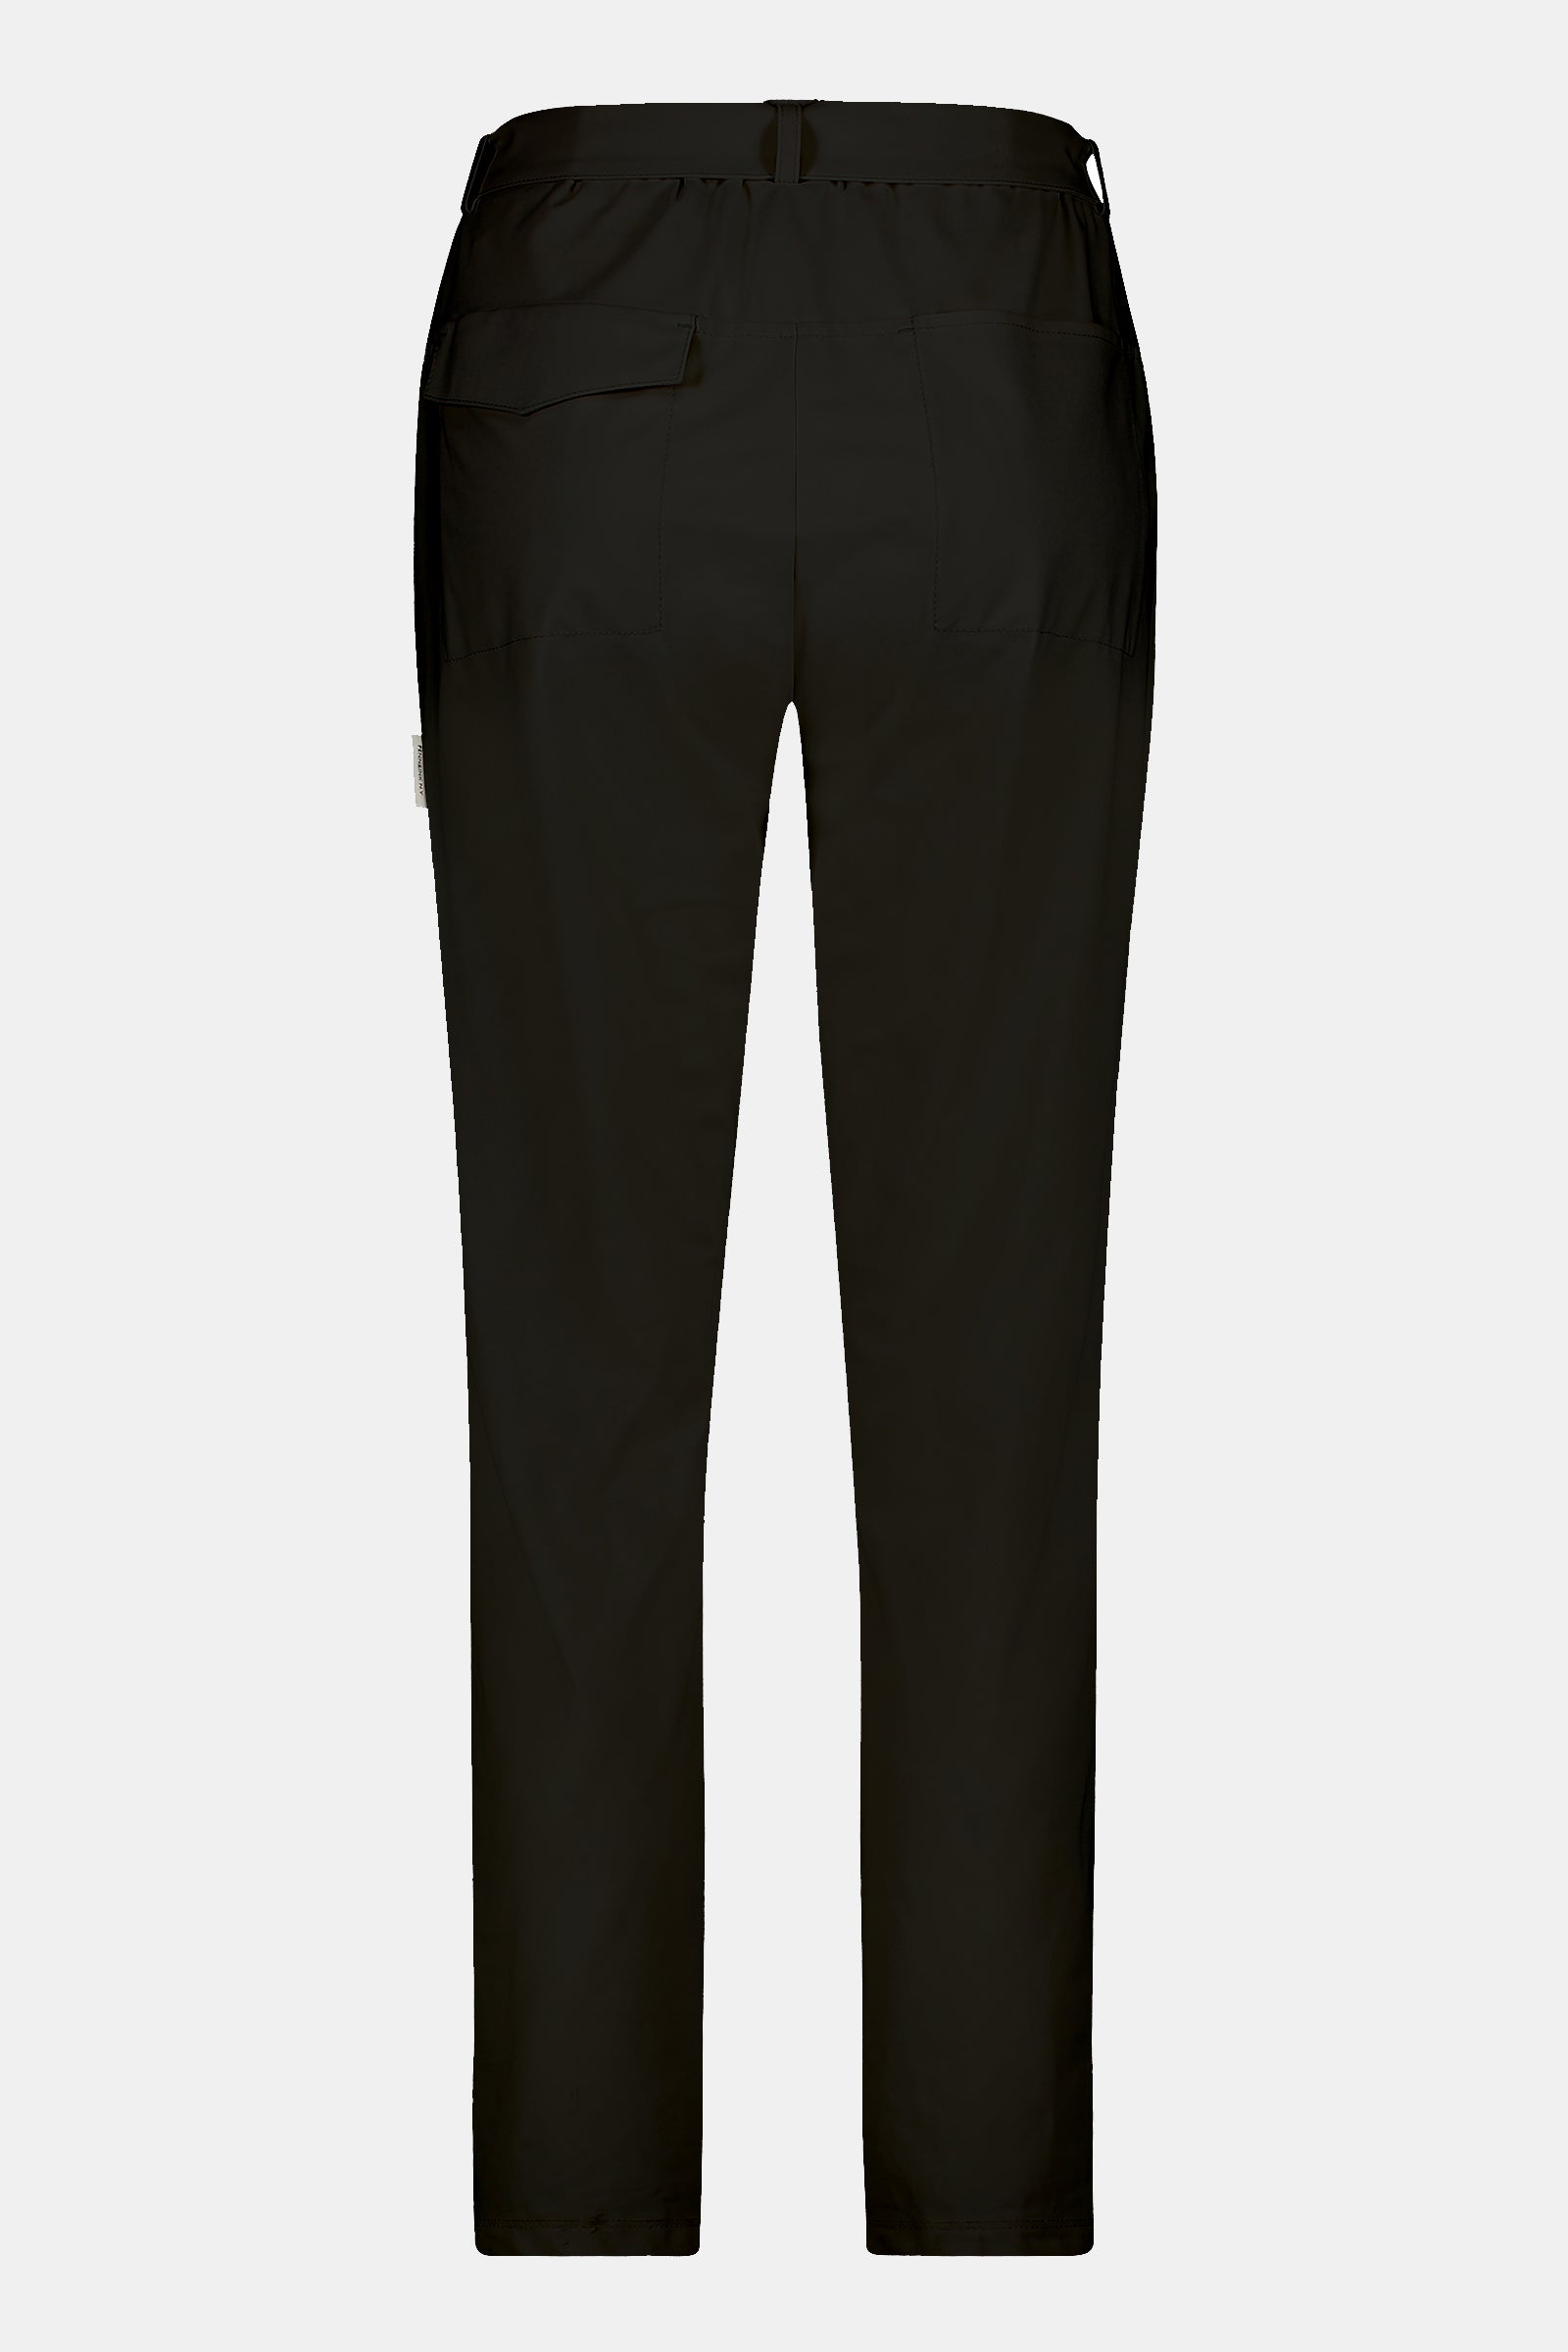 TROUSERS (RALEIGH) BLACK